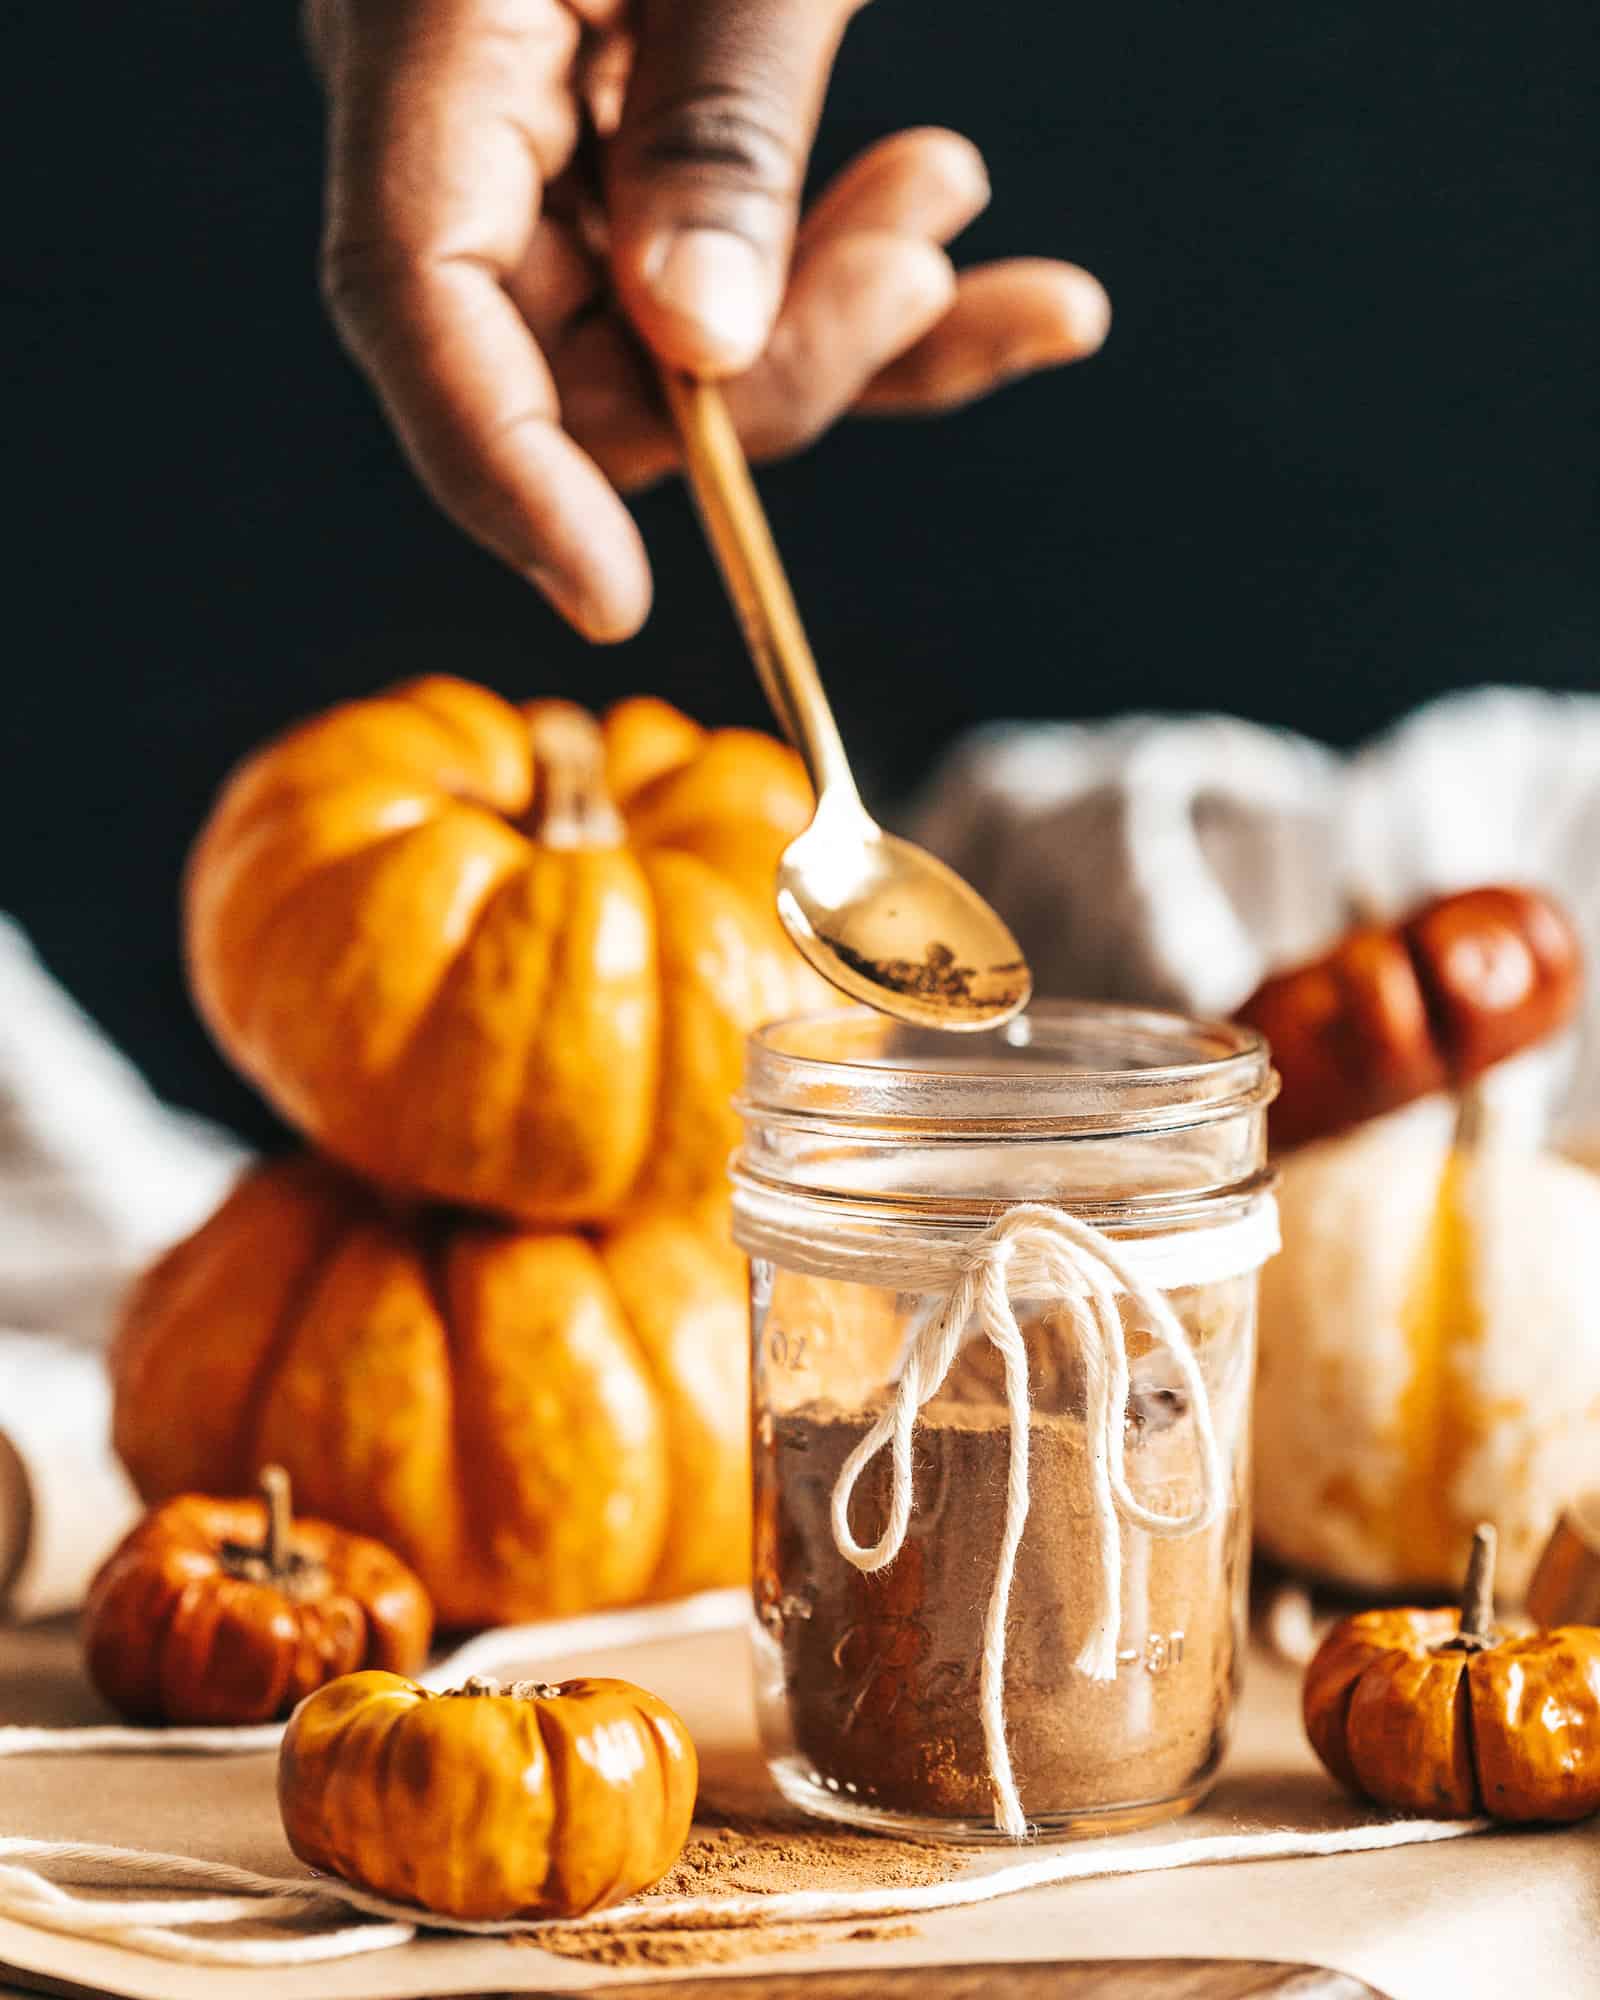 A hand holding a spoonful of Homemade Pumpkin Spice over a jar of more spice with an assortment of pumpkins in the background.